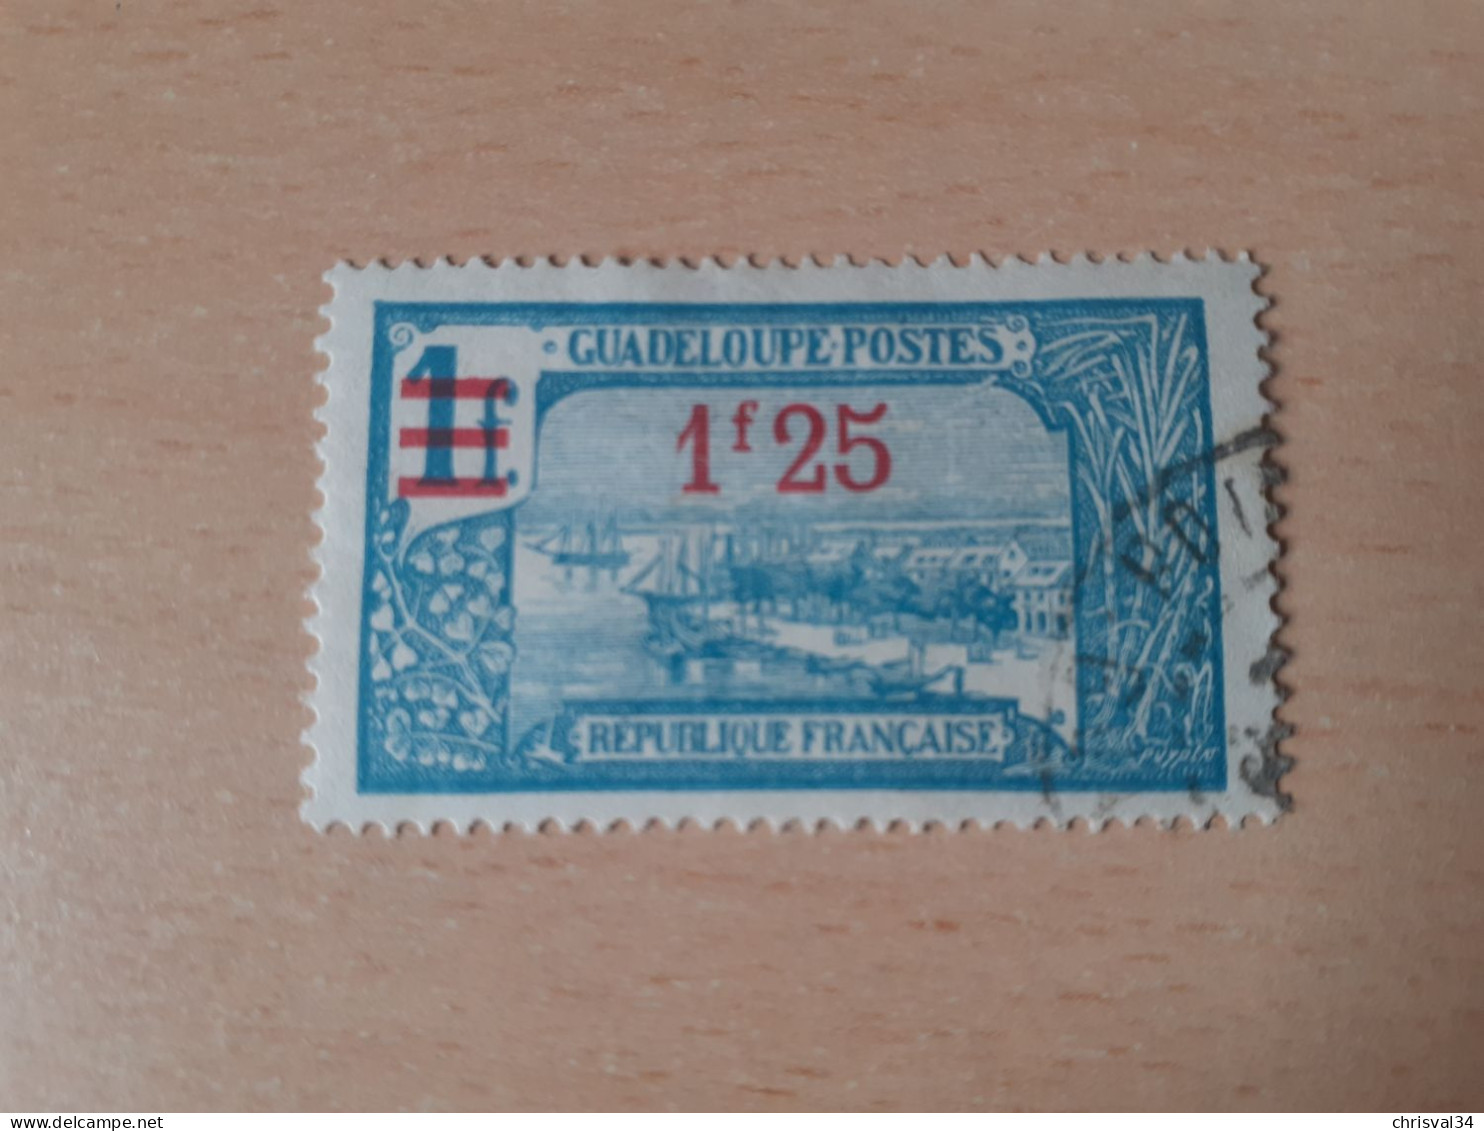 TIMBRE   GUADELOUPE       N  94     COTE  0,75   EUROS  OBLITERE - Used Stamps